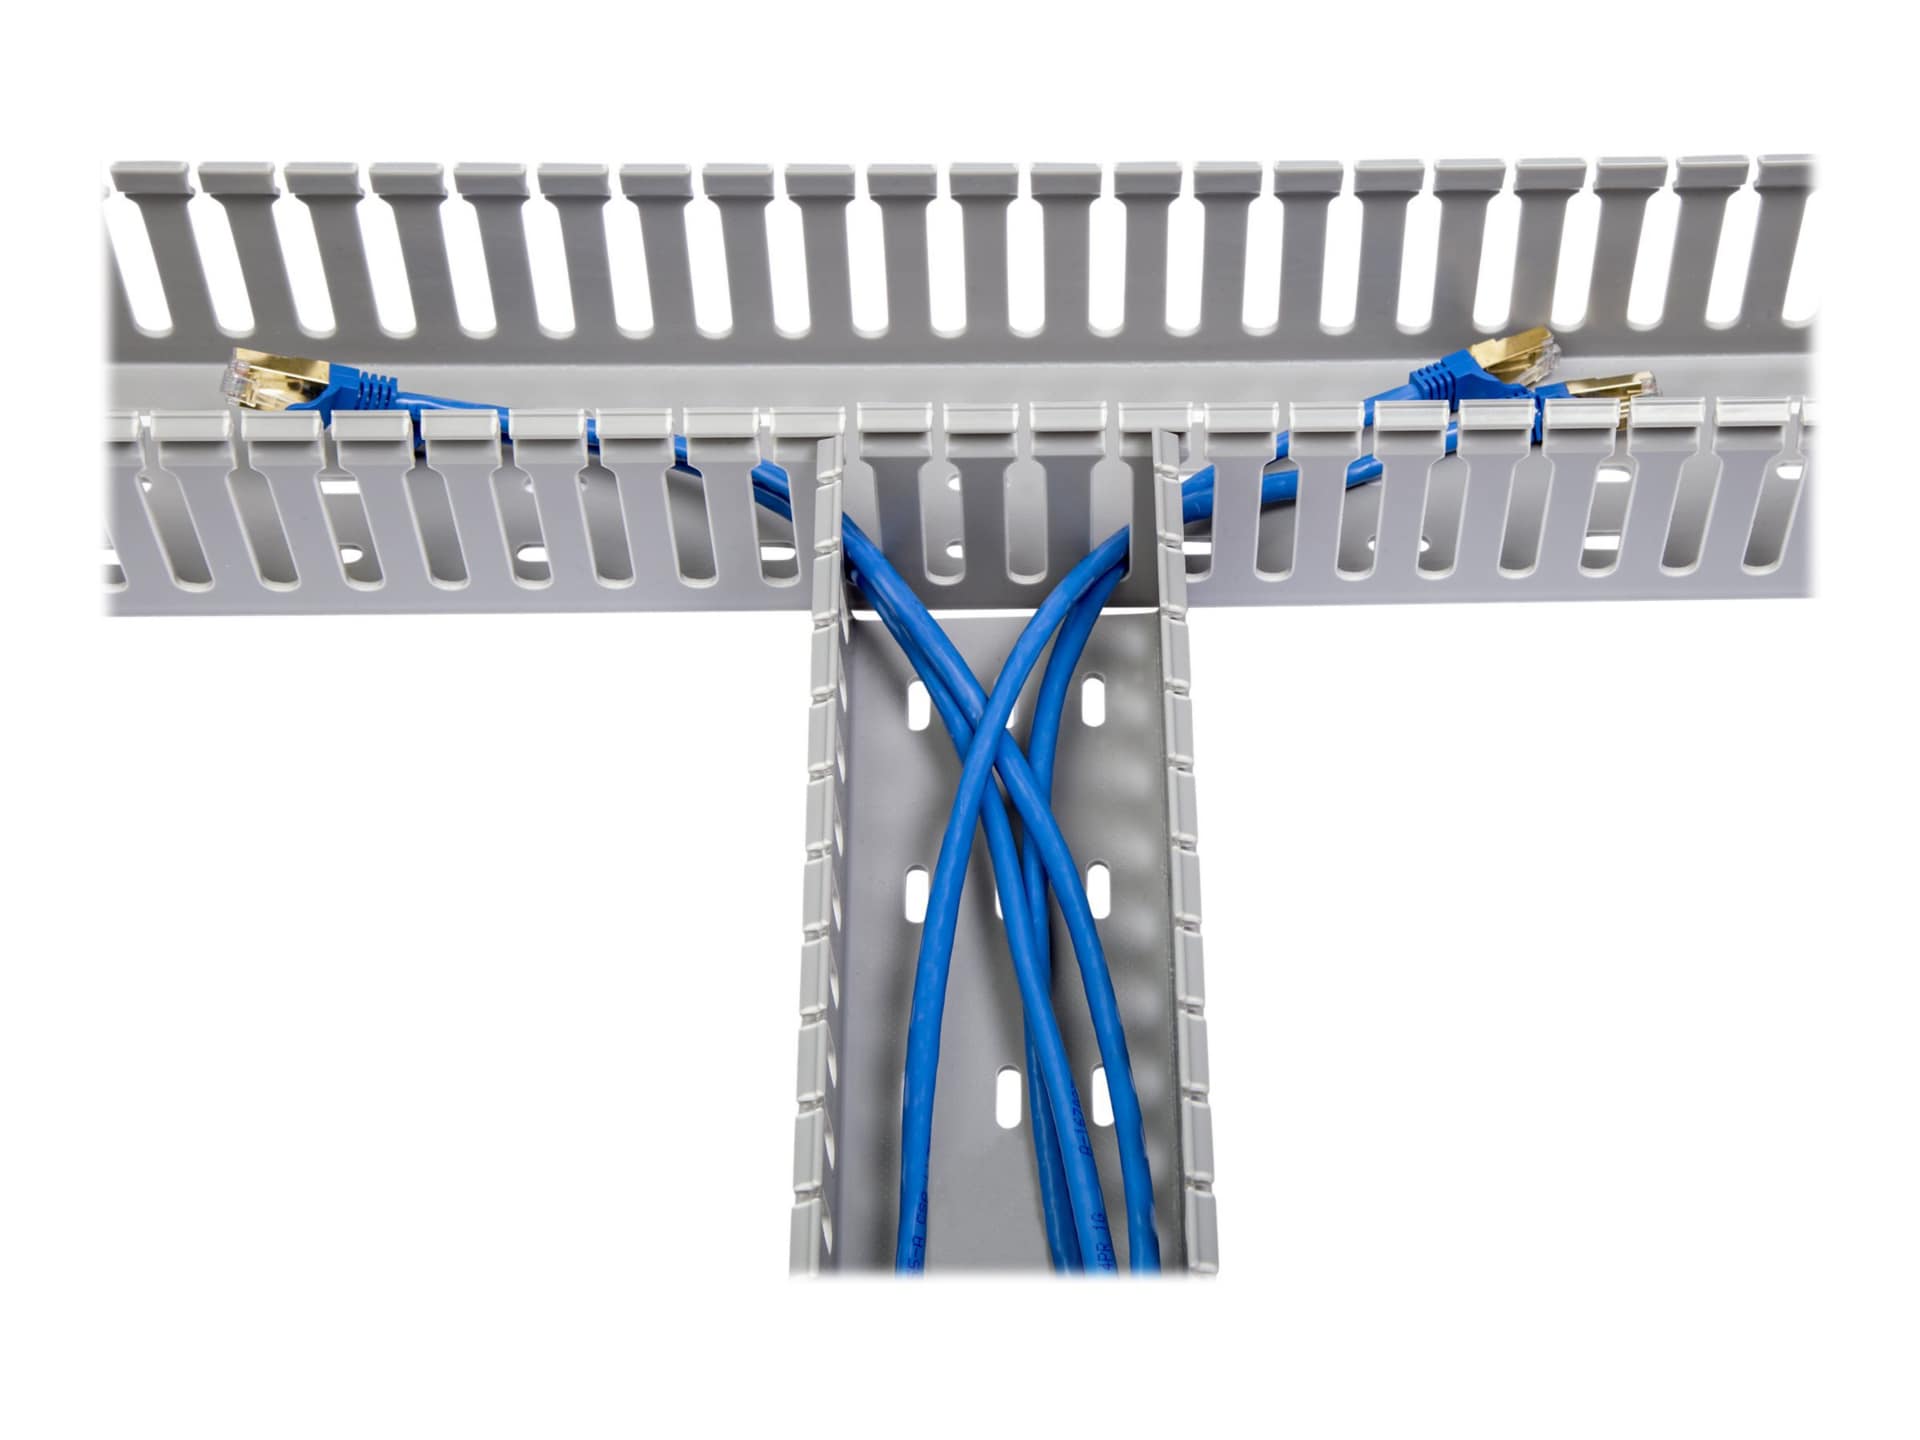 StarTech.com 3x3in Open Slot Wiring Cable Raceway Duct, Server Rack Cable Management, PVC Cable Cover, Cord Hider /